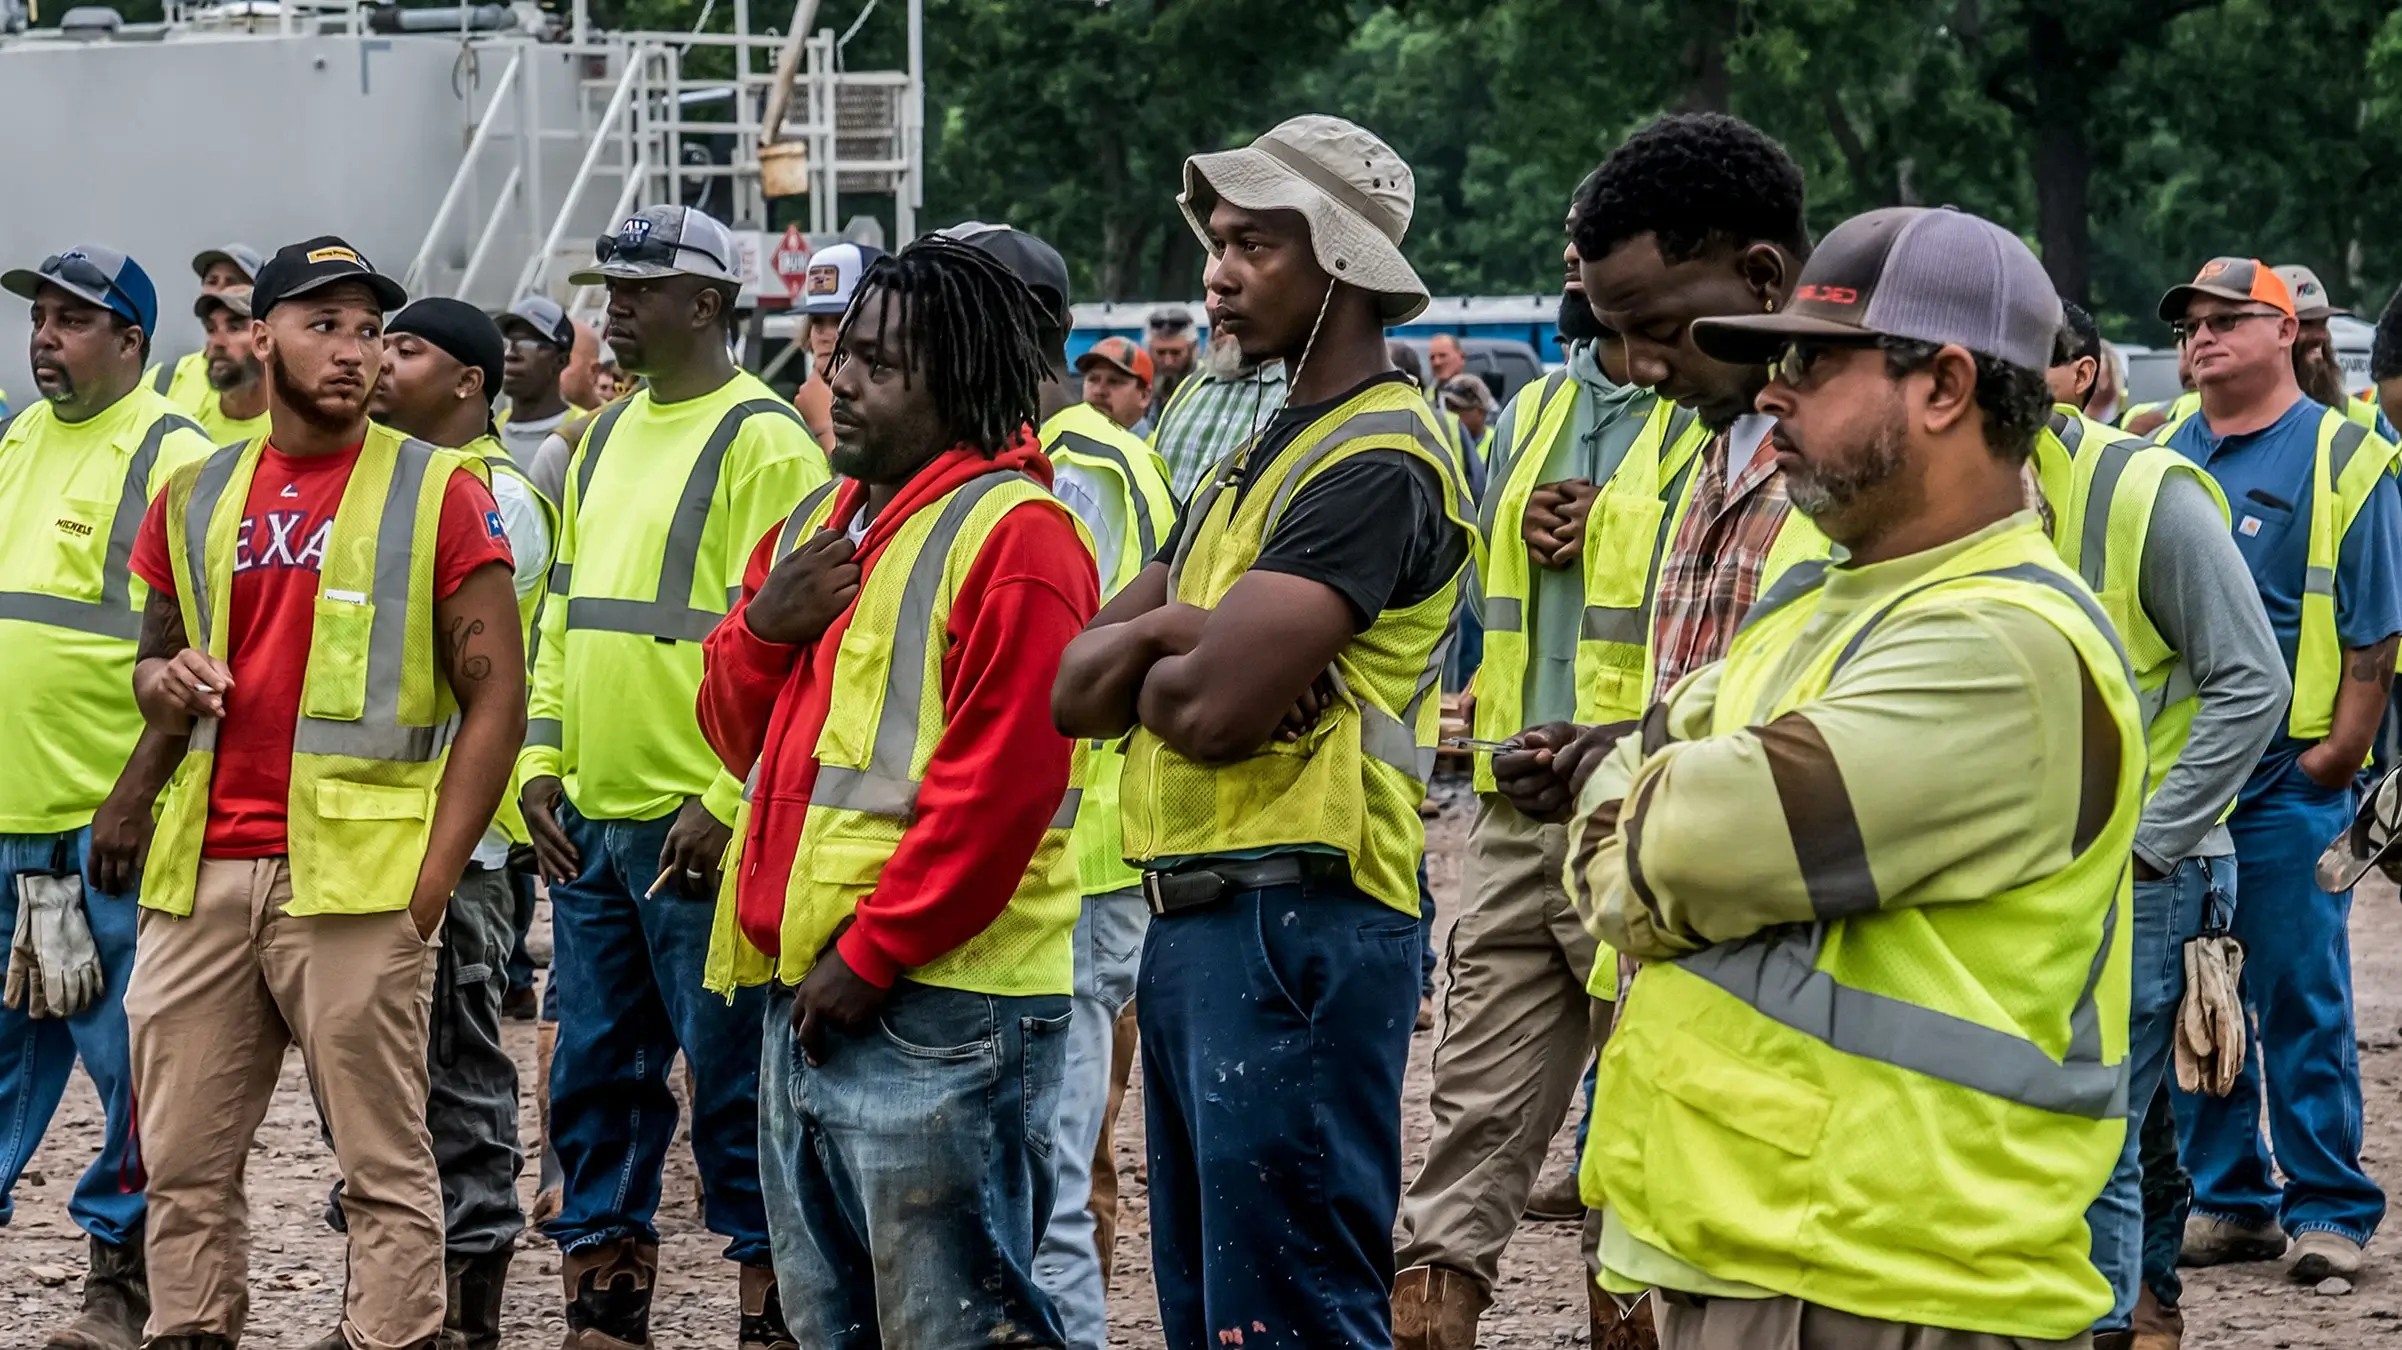 Members of a pipeline crew listen to a safety briefing prior to beginning work.